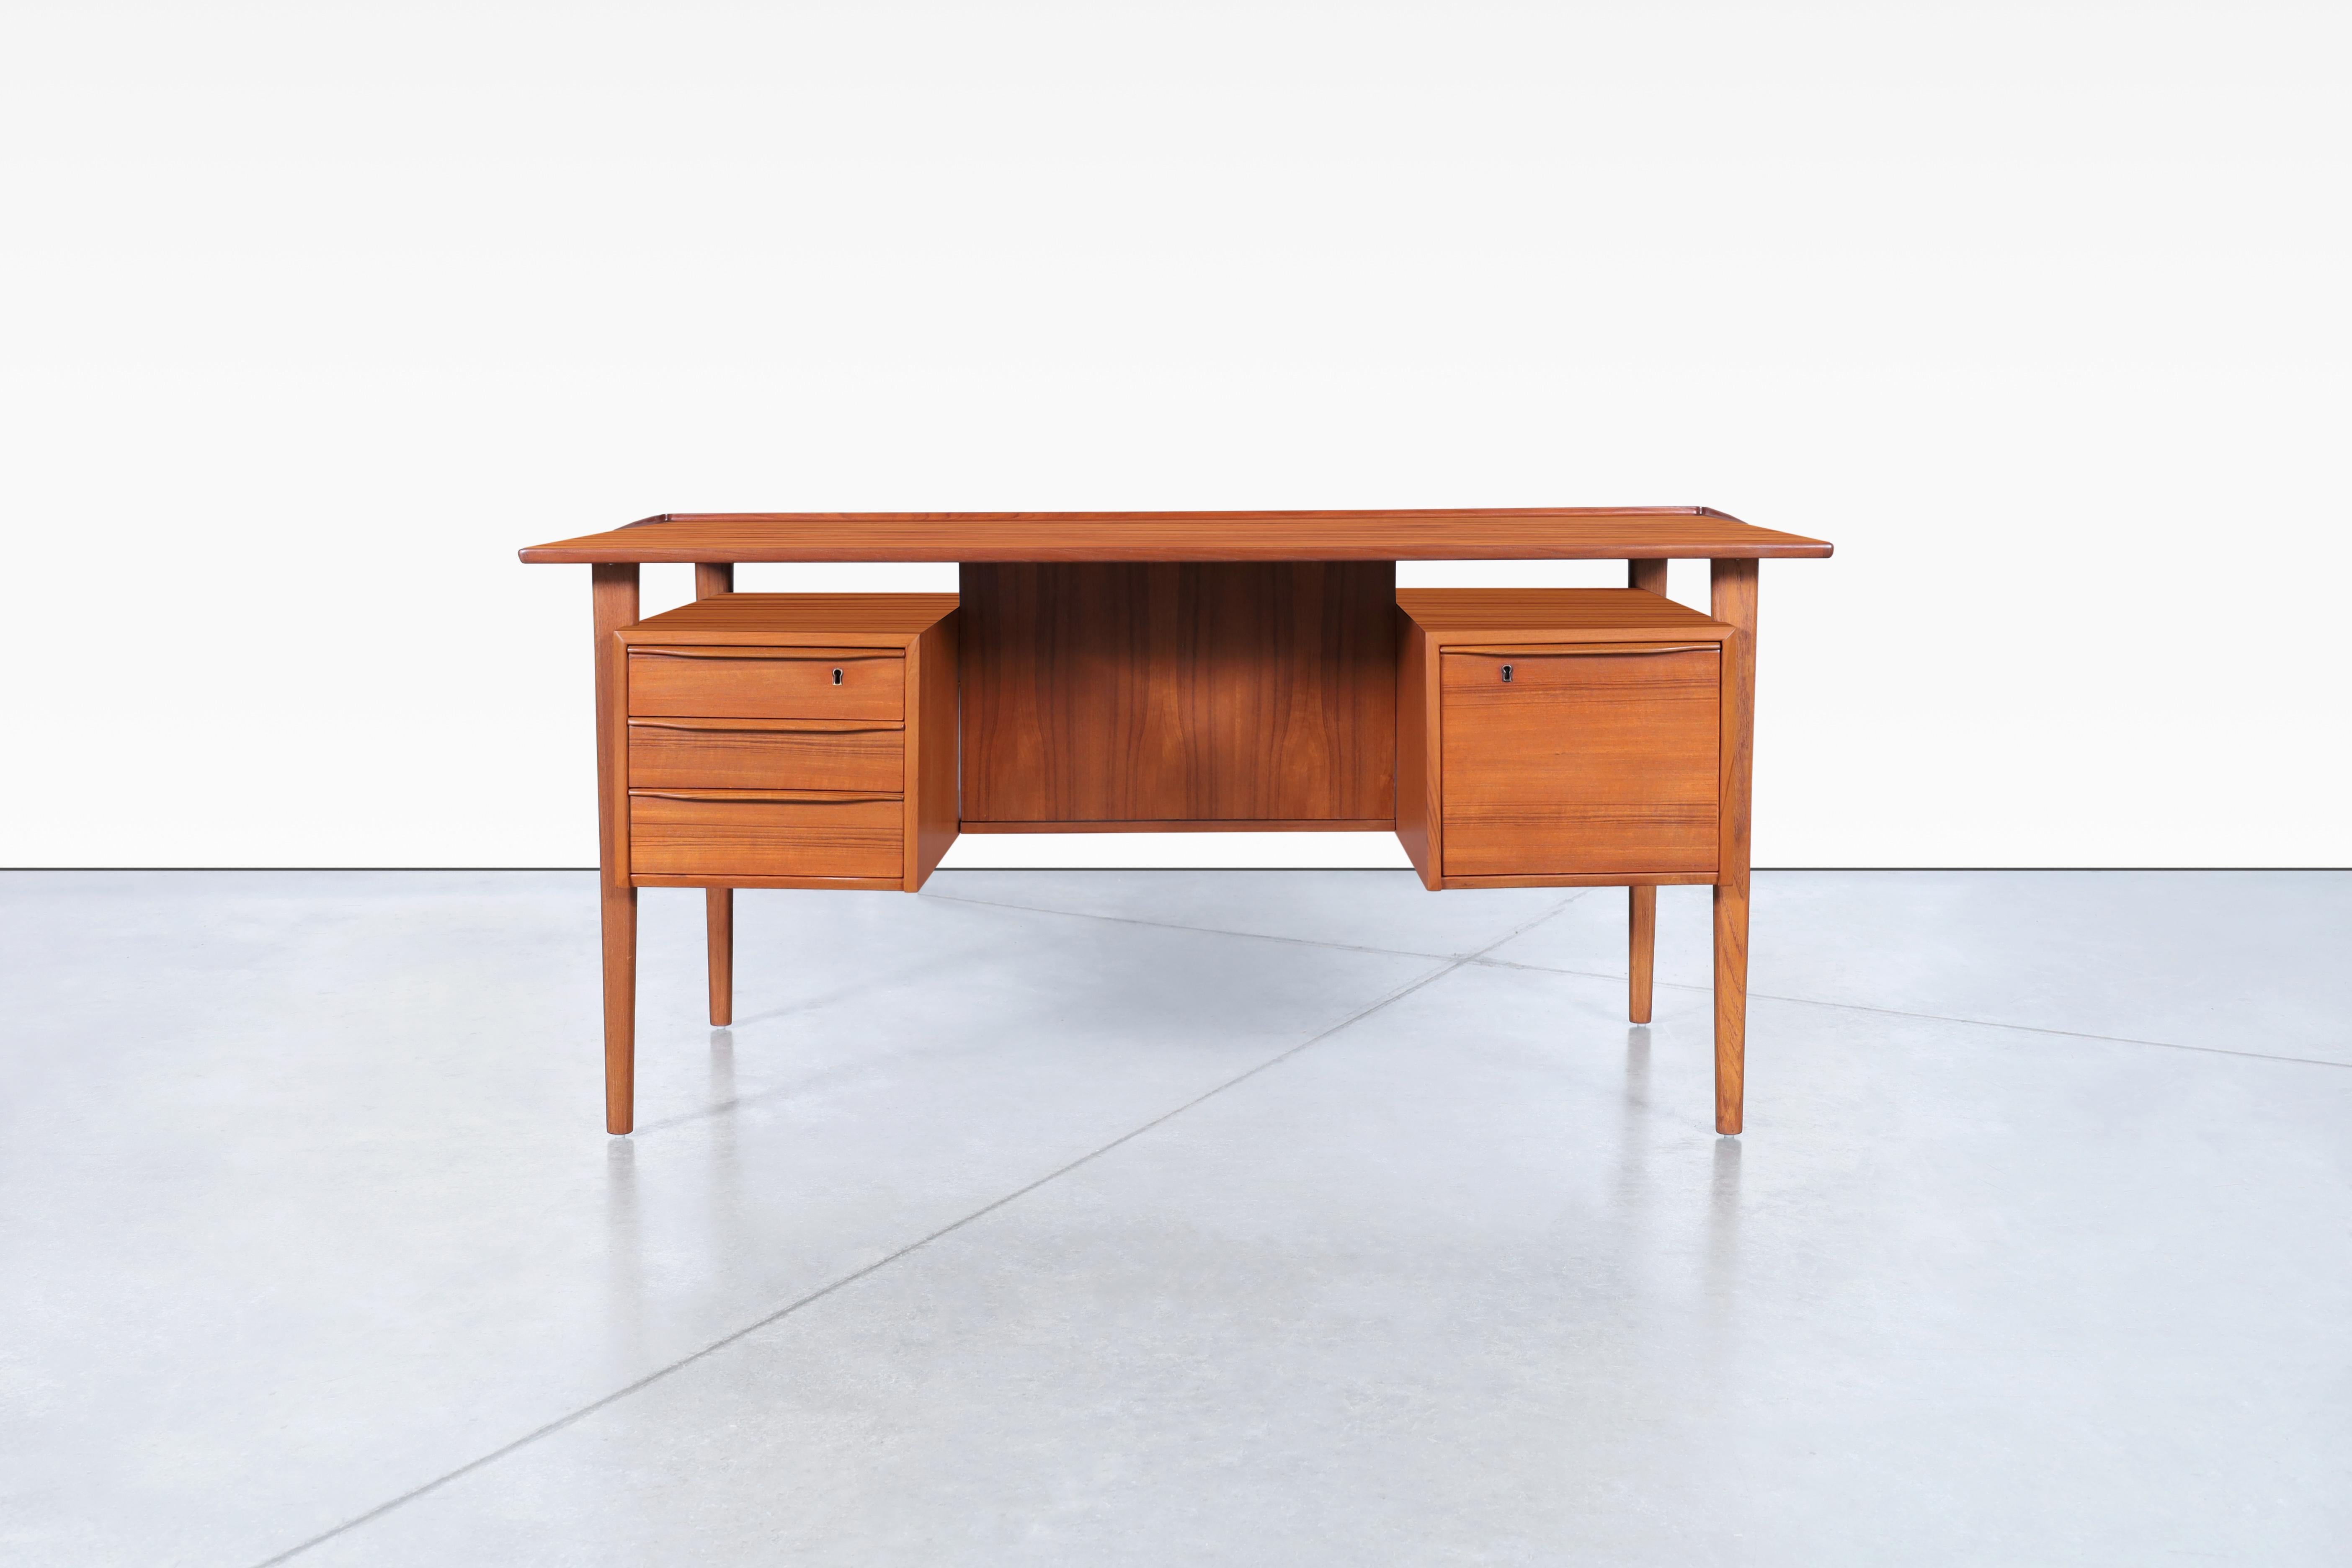 Fabulous Danish modern floating top teak desk designed by Peter Løvig Nielsen for Løvig Dansk in Denmark, circa 1960s. Features a floating top design with a raised lip along the edges, which will offer you an excellent workspace. This desk has three